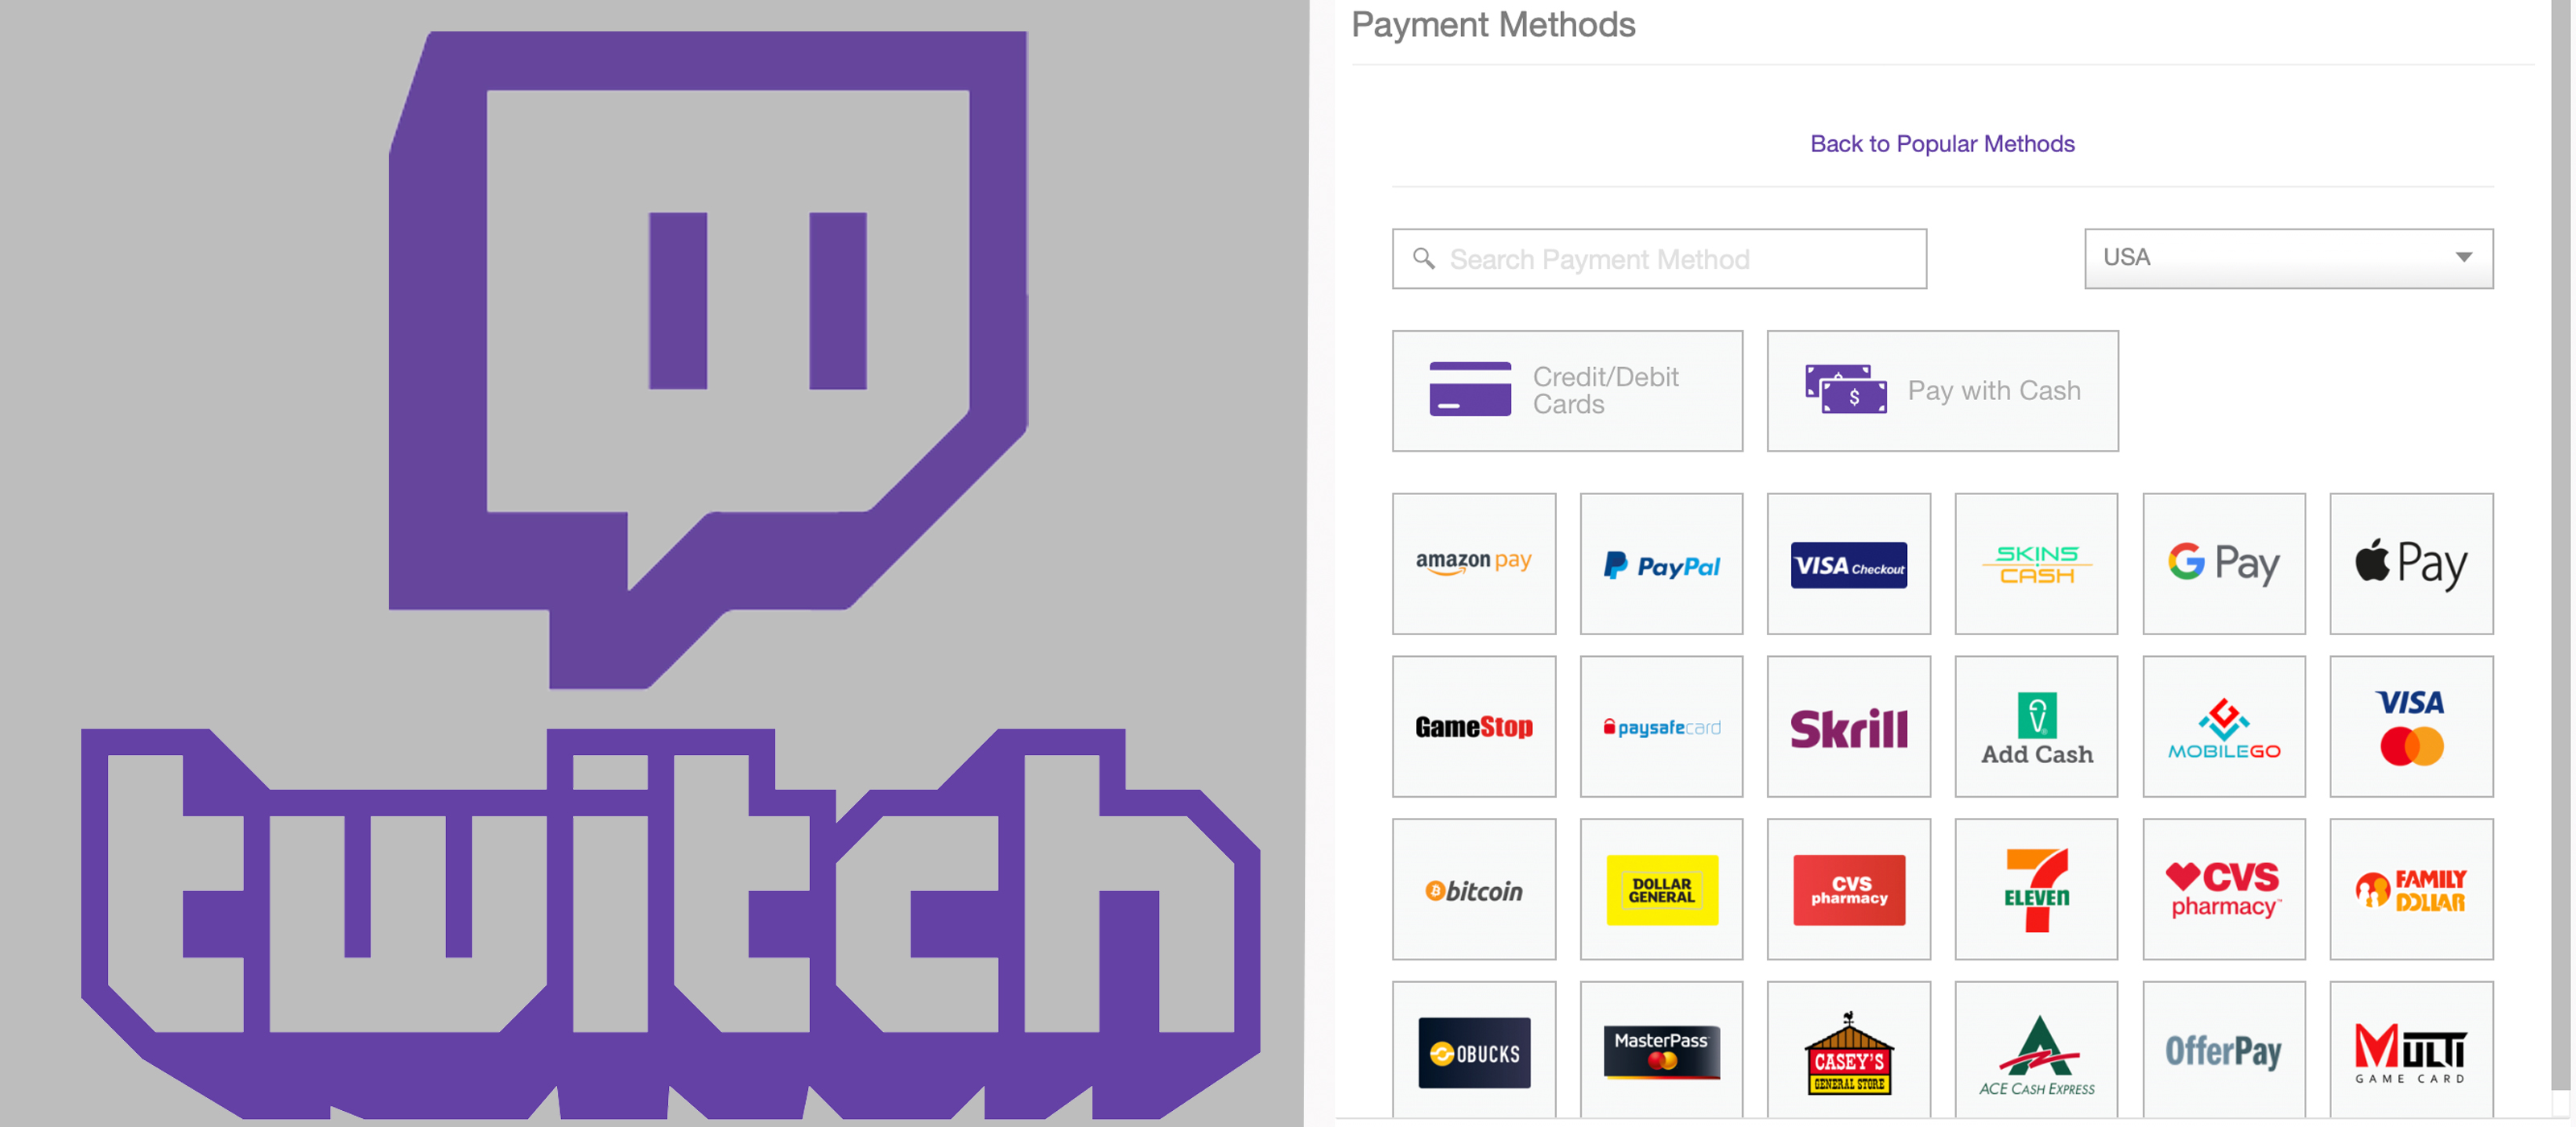 Tip Twitch Livestreamers With BCH Using the New Tipbitcoin.cash App 